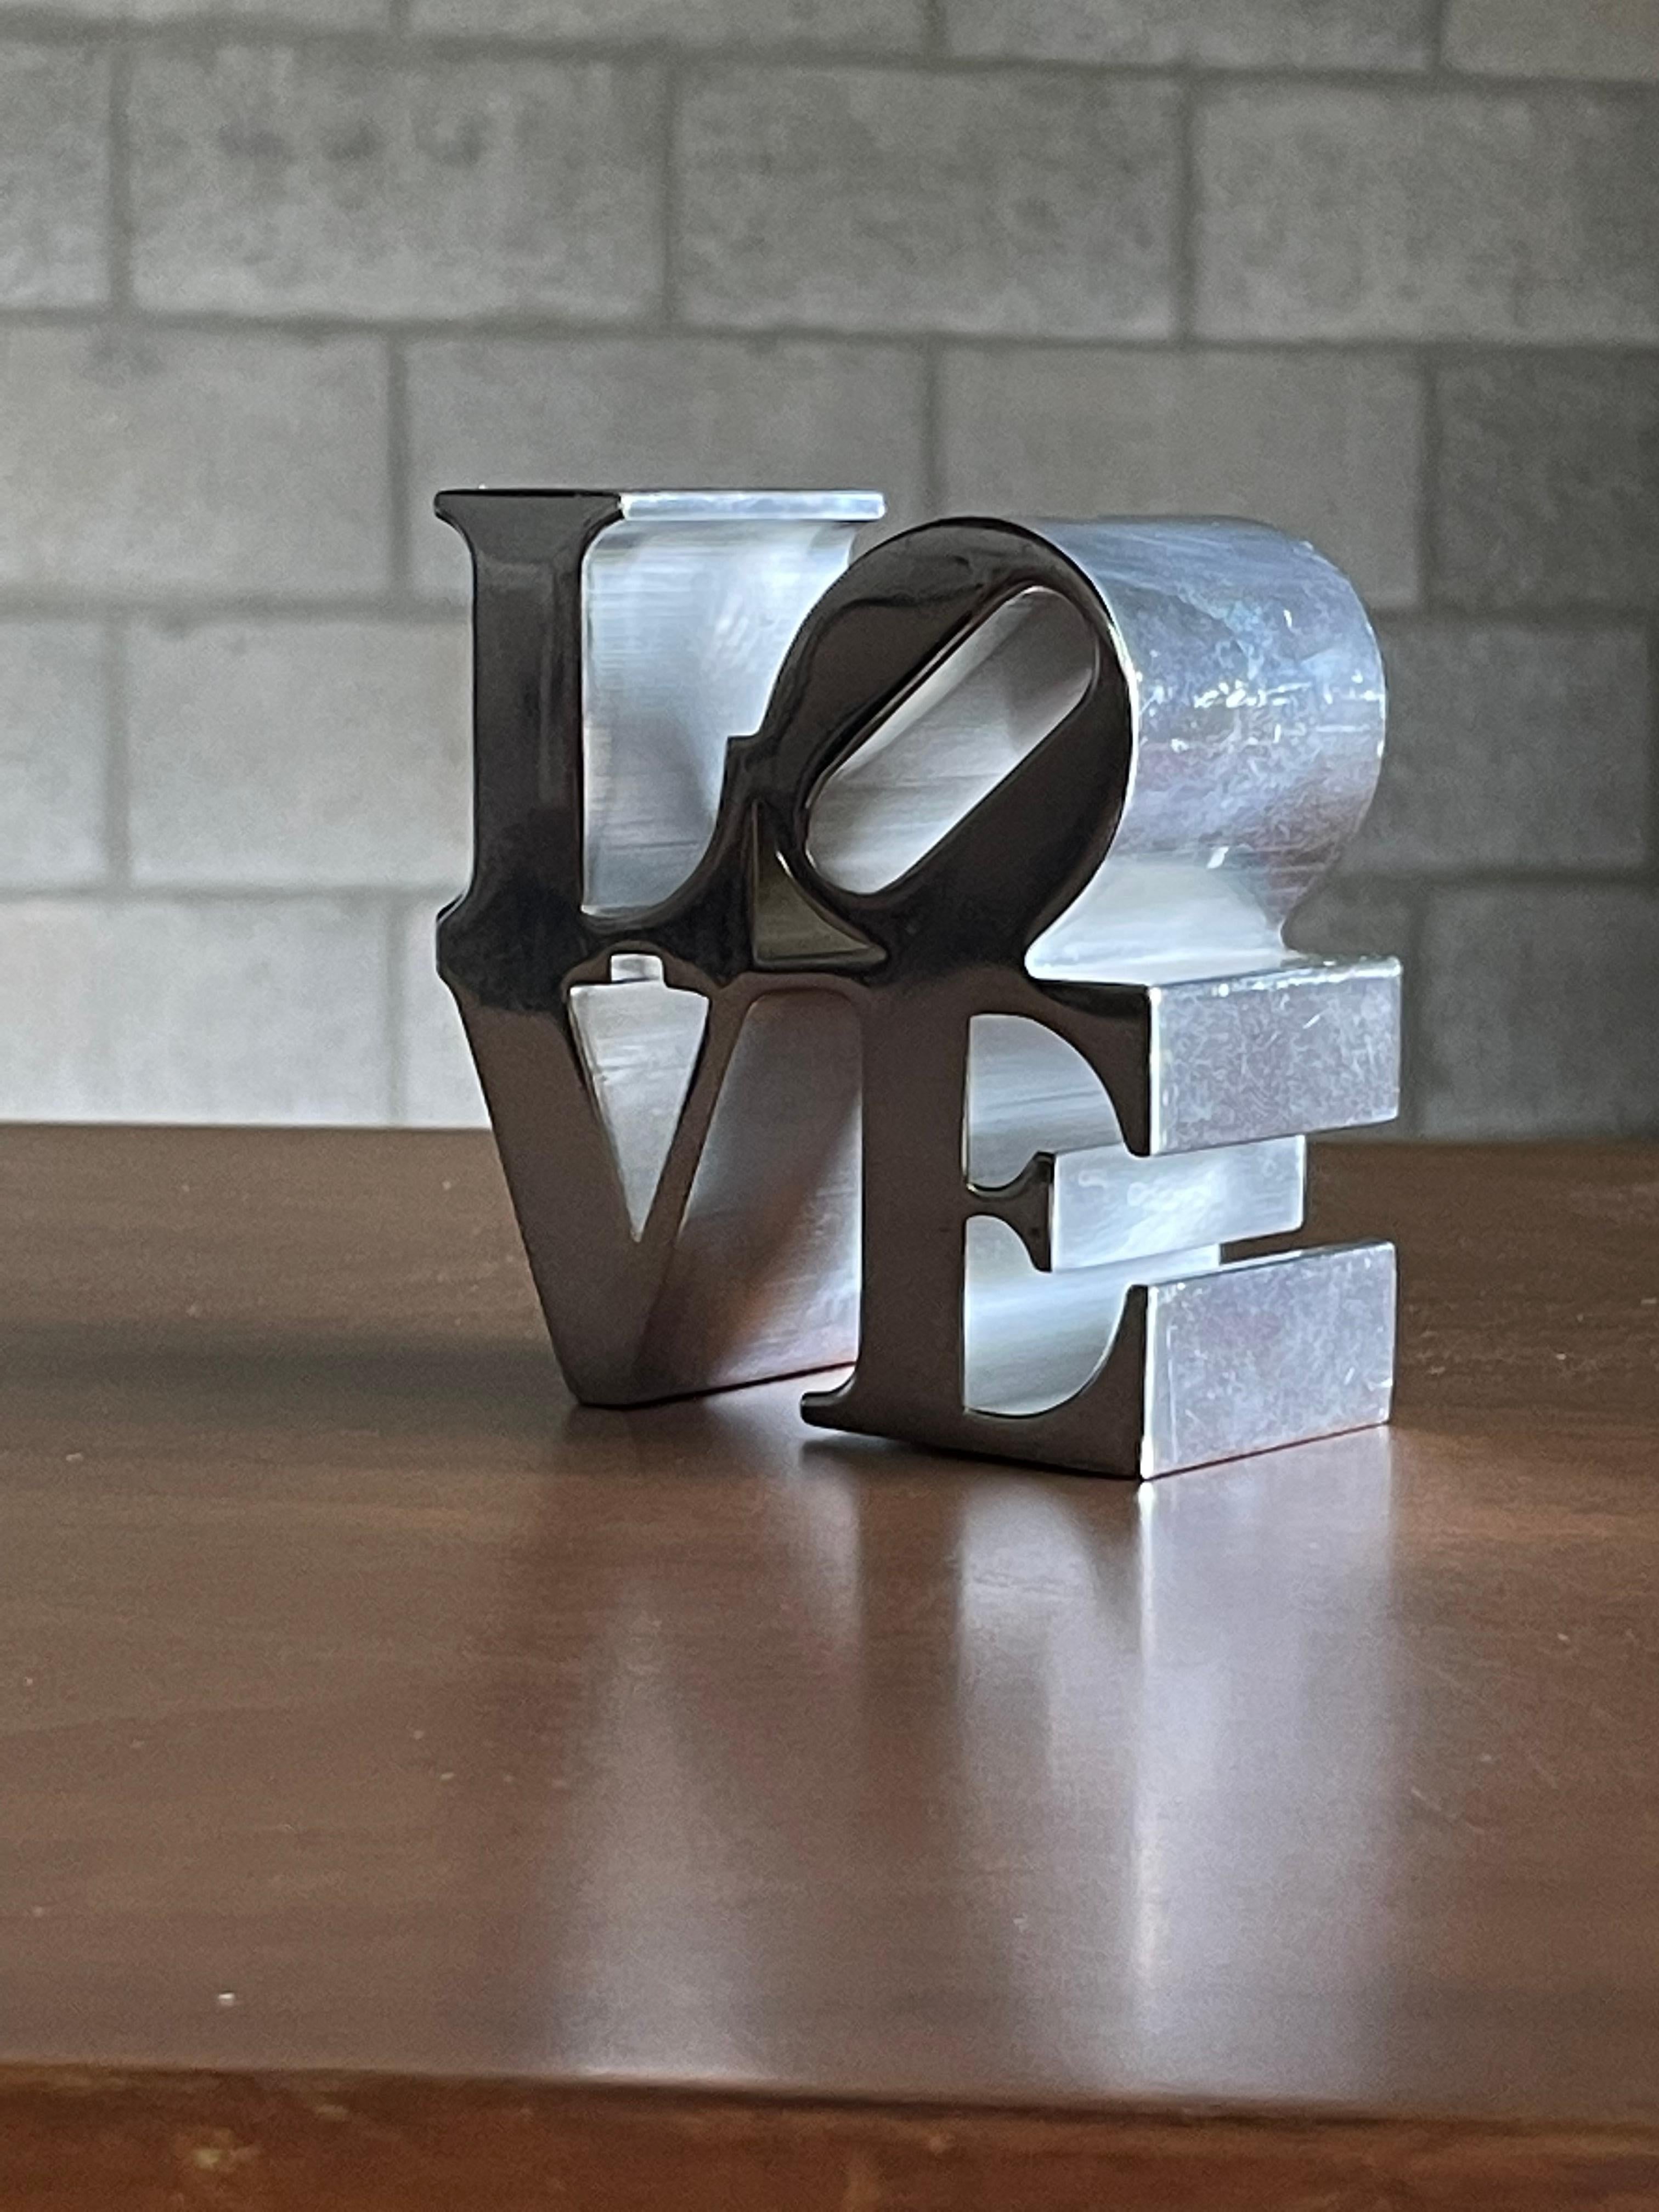 A paperweight in polished metal after Robert Indiana. Likely purchased at MoMA. This piece would add great modernist character to any desk or office environment.